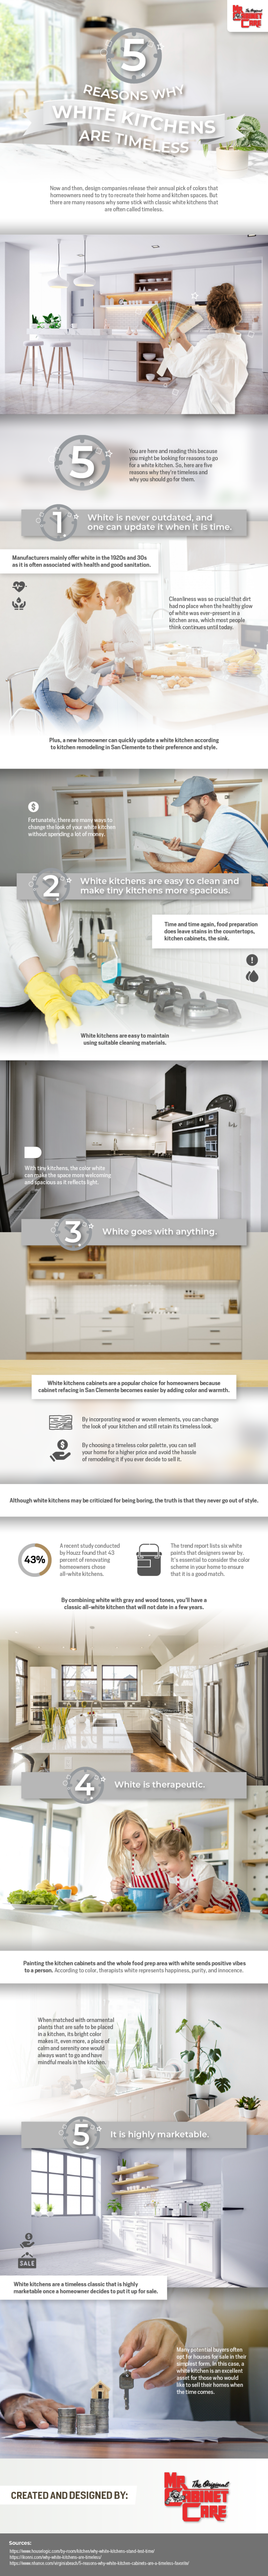 Why_White_Kitchens_are_Timeless?_infographic_image